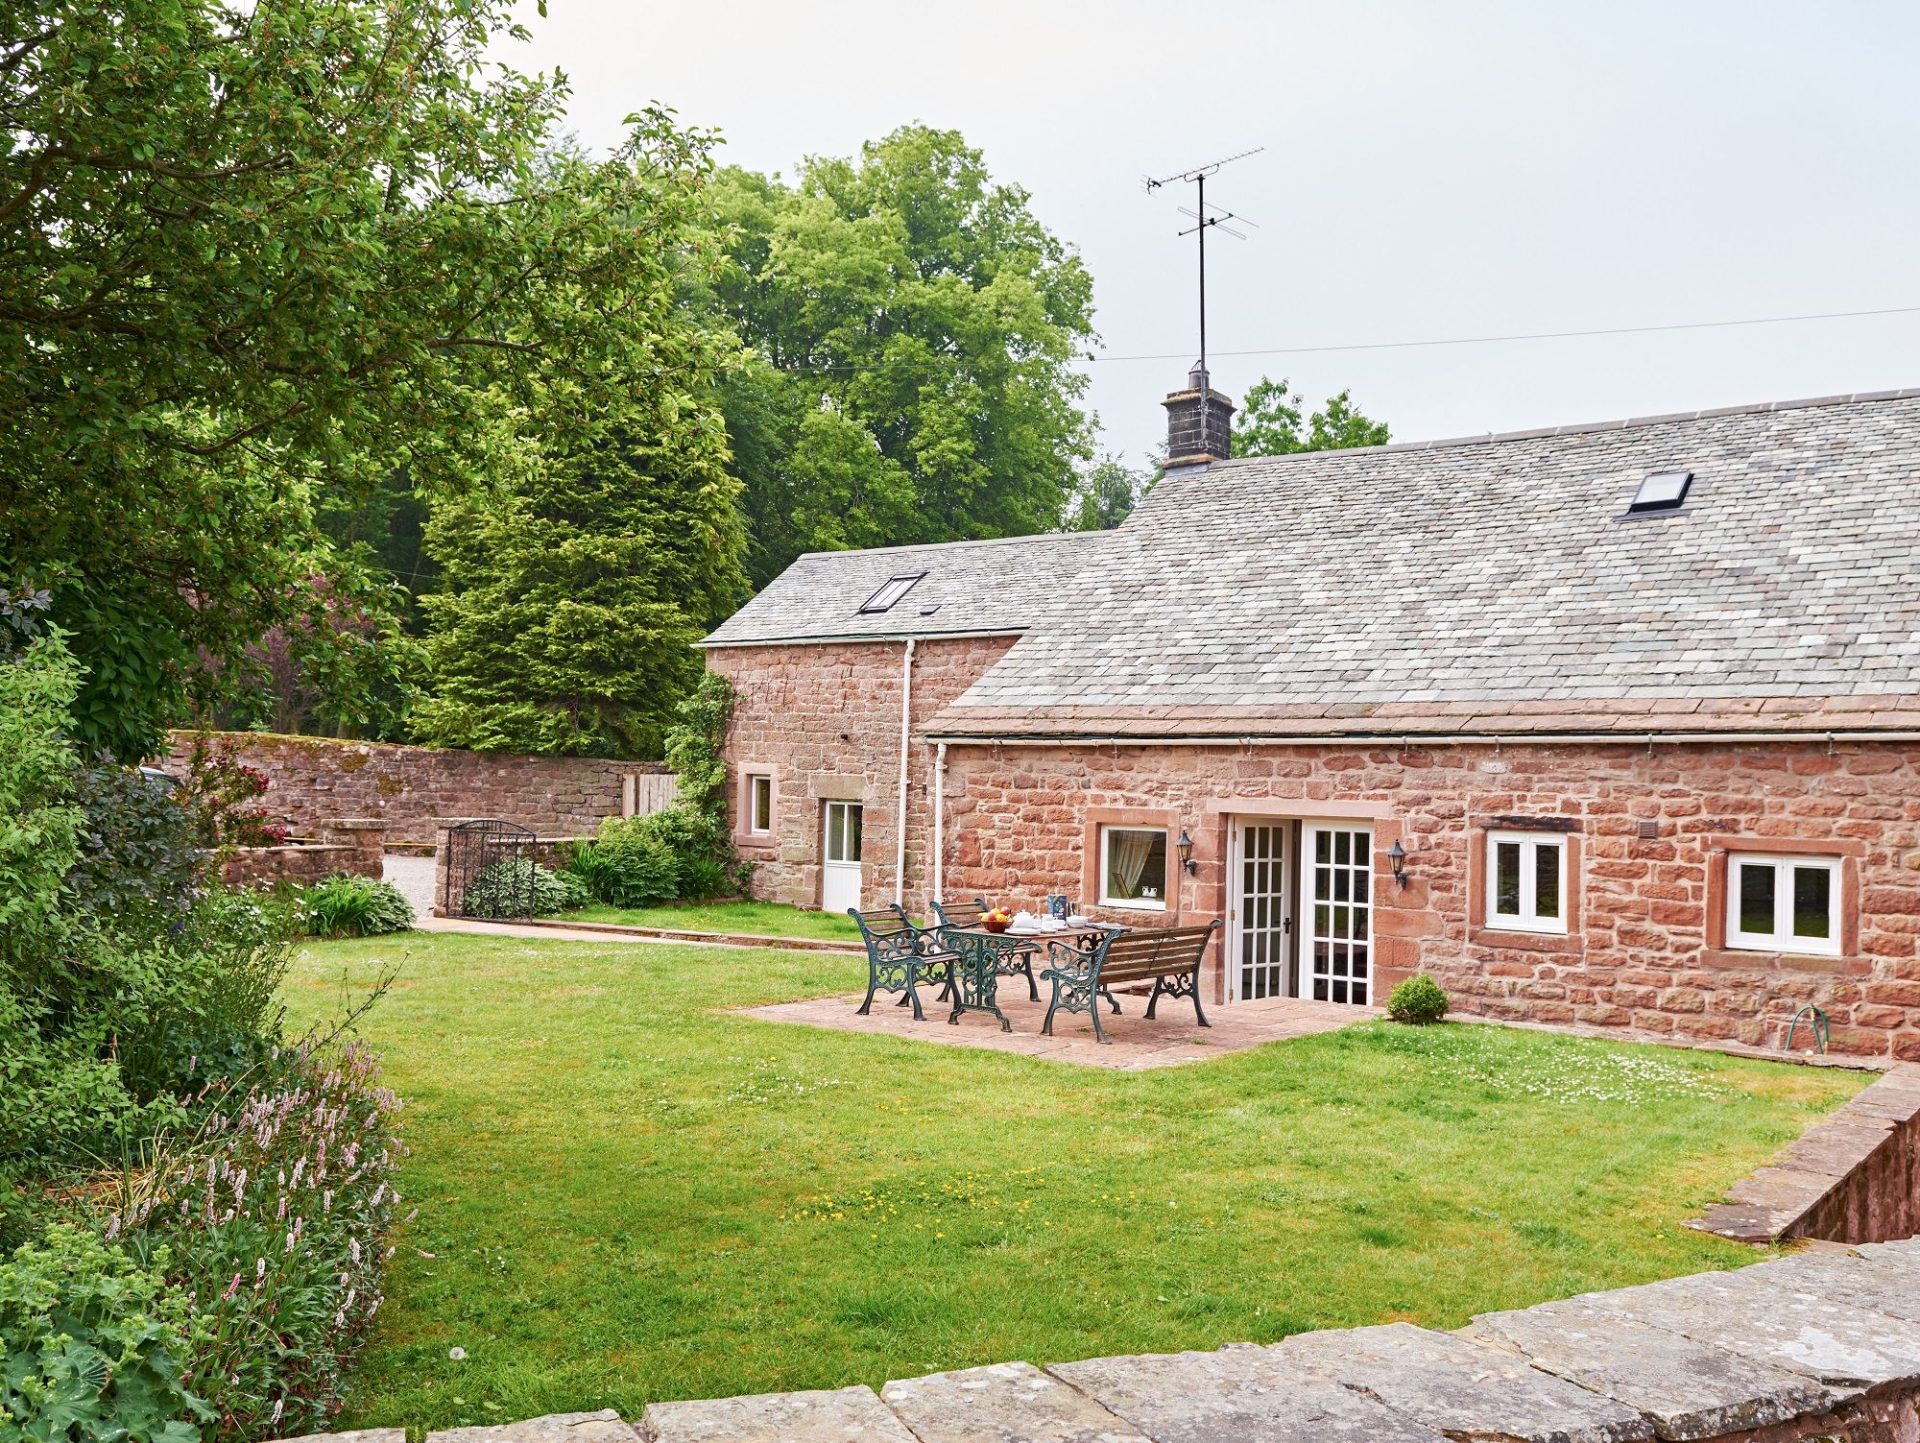 Stag Cottage luxury holiday cottage at The Rowley Estates with private front and rear gardens sandstone walled and gated families and dogs welcome